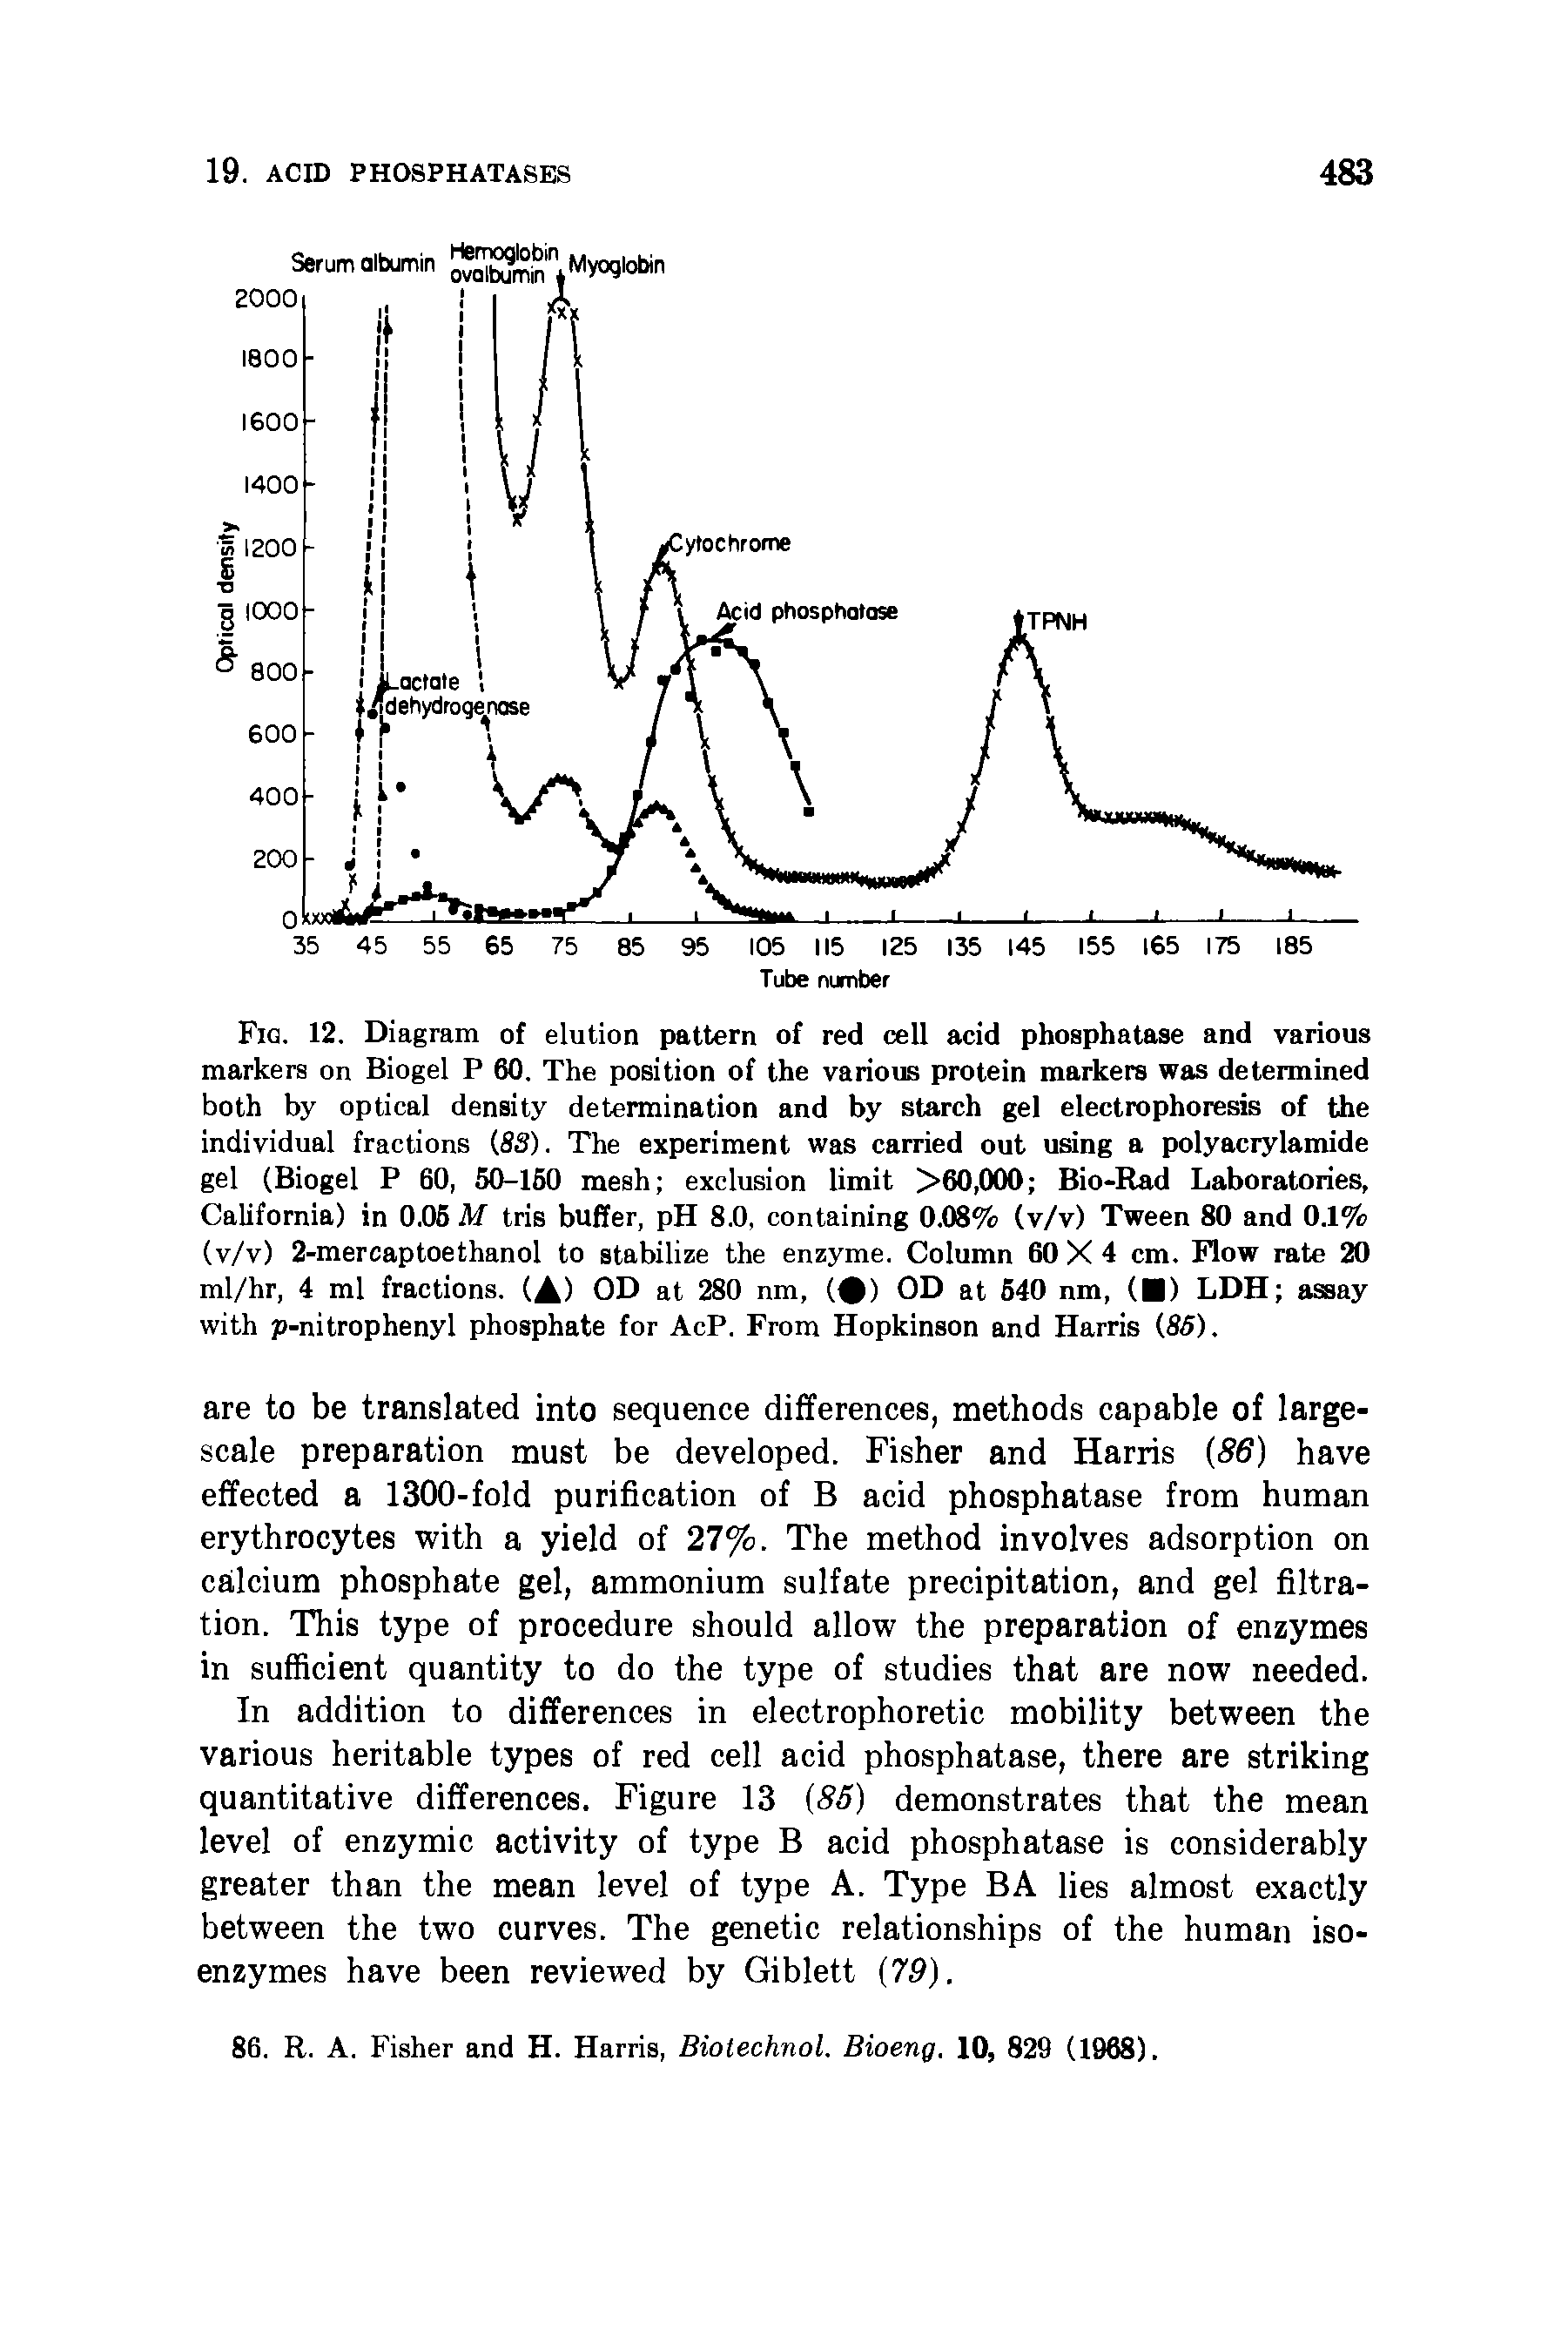 Fig. 12. Diagram of elution pattern of red cell acid phosphatase and various markers on Biogel P 60. The position of the various protein markers was determined both by optical density determination and by starch gel electrophoresis of the individual fractions (83). The experiment was carried out using a polyacrylamide gel (Biogel P 60, 50-150 mesh exclusion limit >60,000 Bio-Rad Laboratories, California) in 0.05 M tris buffer, pH 8.0, containing 0.08% (v/v) Tween 80 and 0.1% (v/v) 2-mercaptoethanol to stabilize the enzyme. Column 60 X 4 cm. Flow rate 20 ml/hr, 4 ml fractions. (A) OD at 280 nm, ( ) OD at 540 nm, ( ) LDH assay with p-nitrophenyl phosphate for AcP. From Hopkinson and Harris (85).